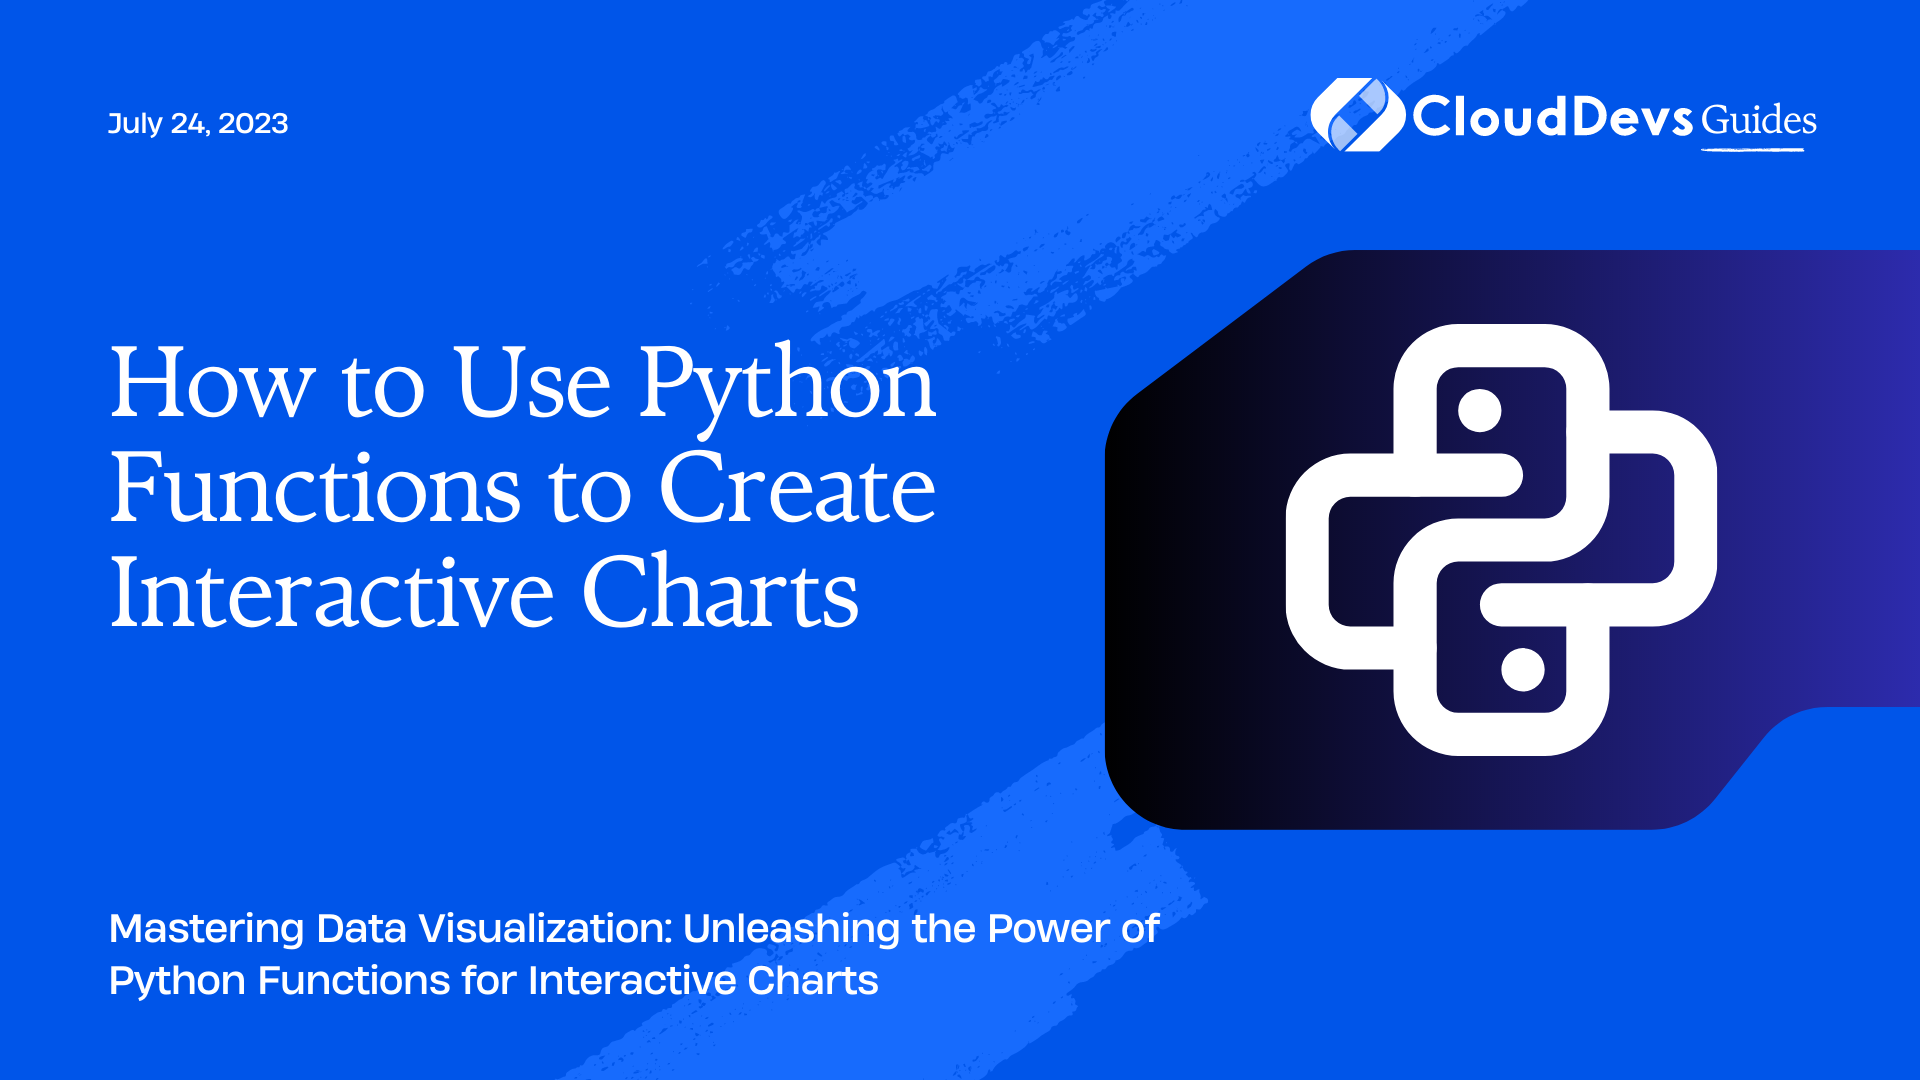 How to Use Python Functions to Create Interactive Charts